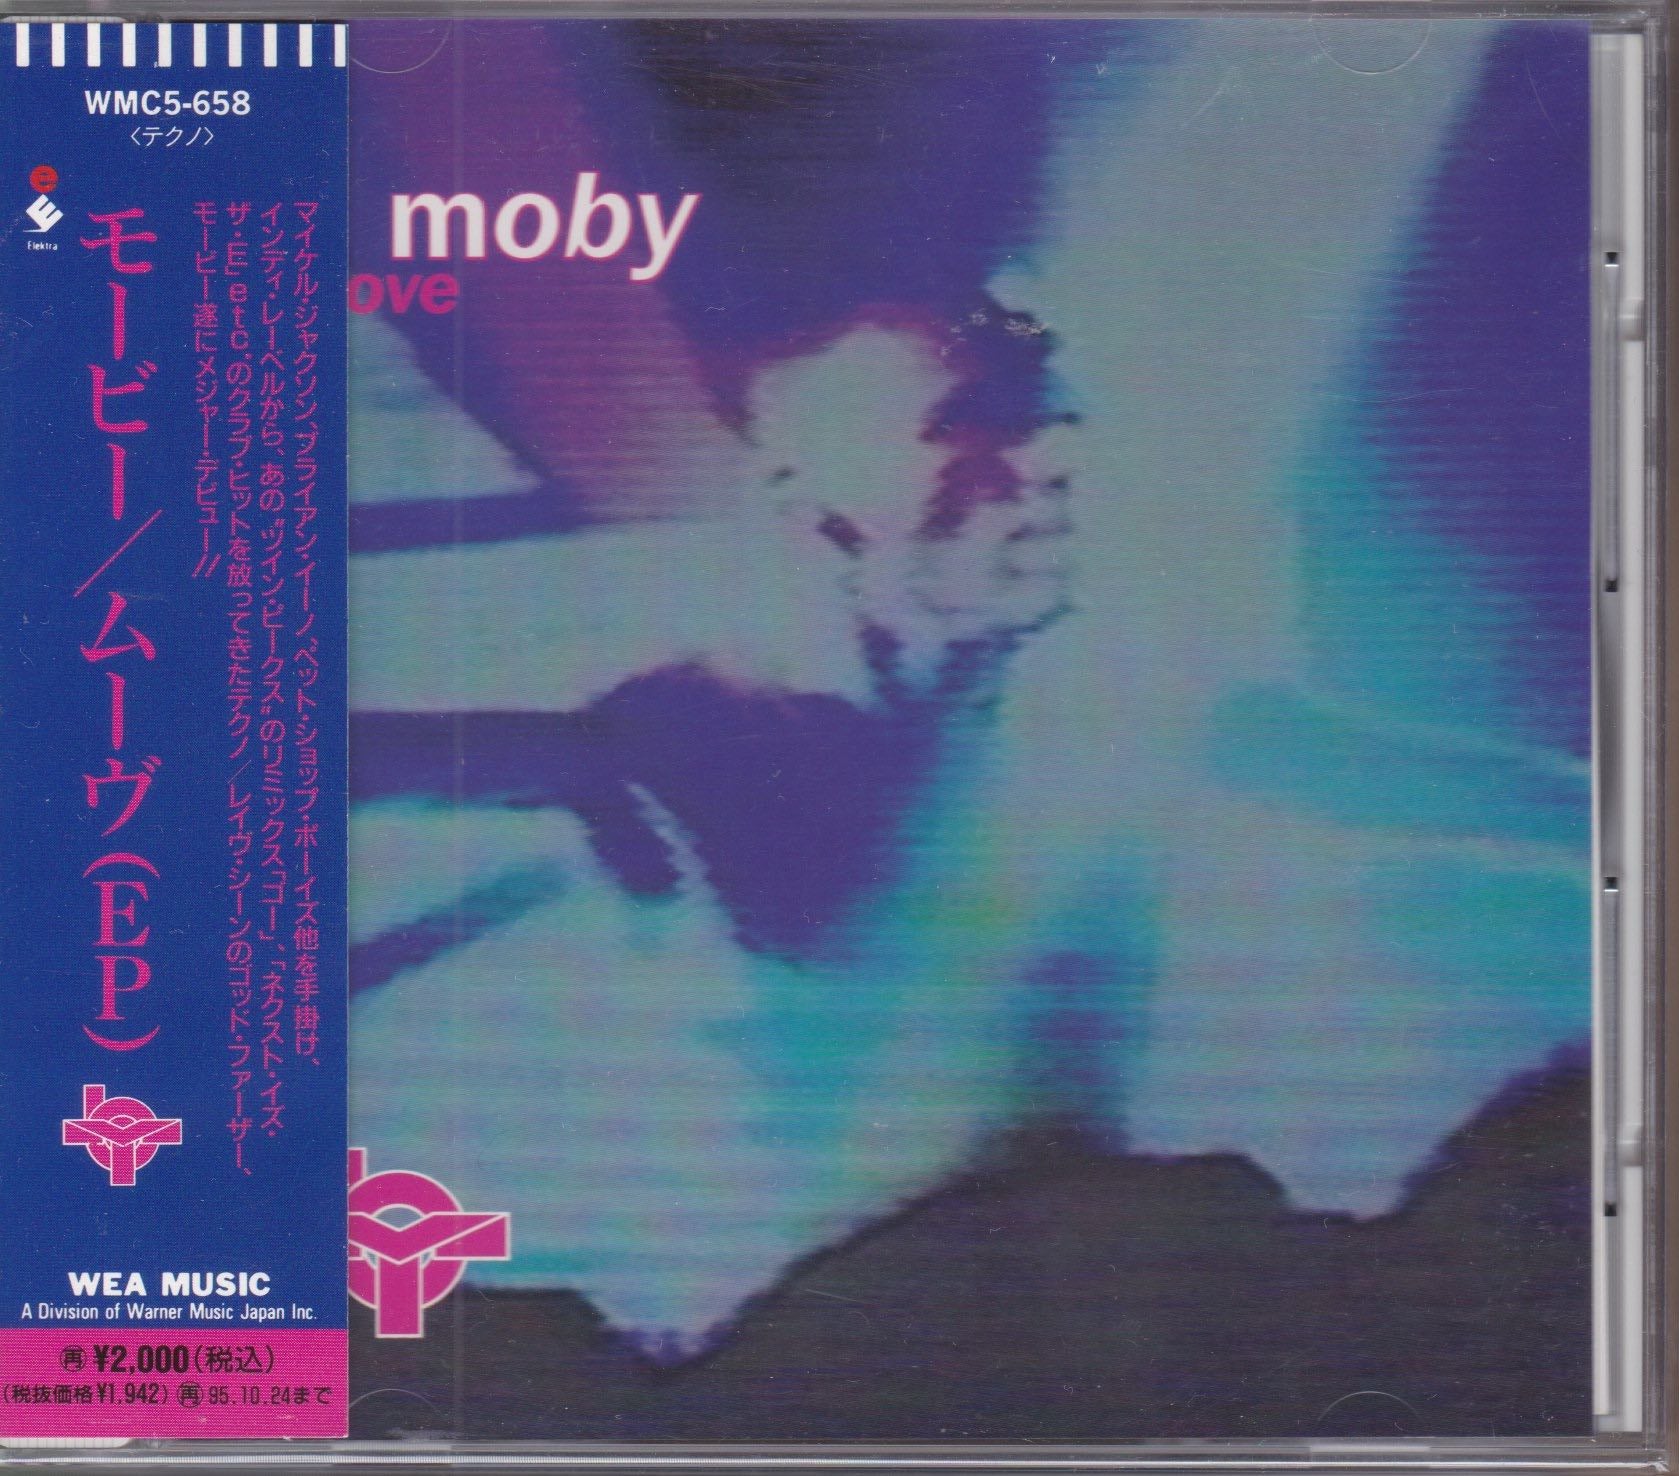 Moby - Move     (Pre-owned)